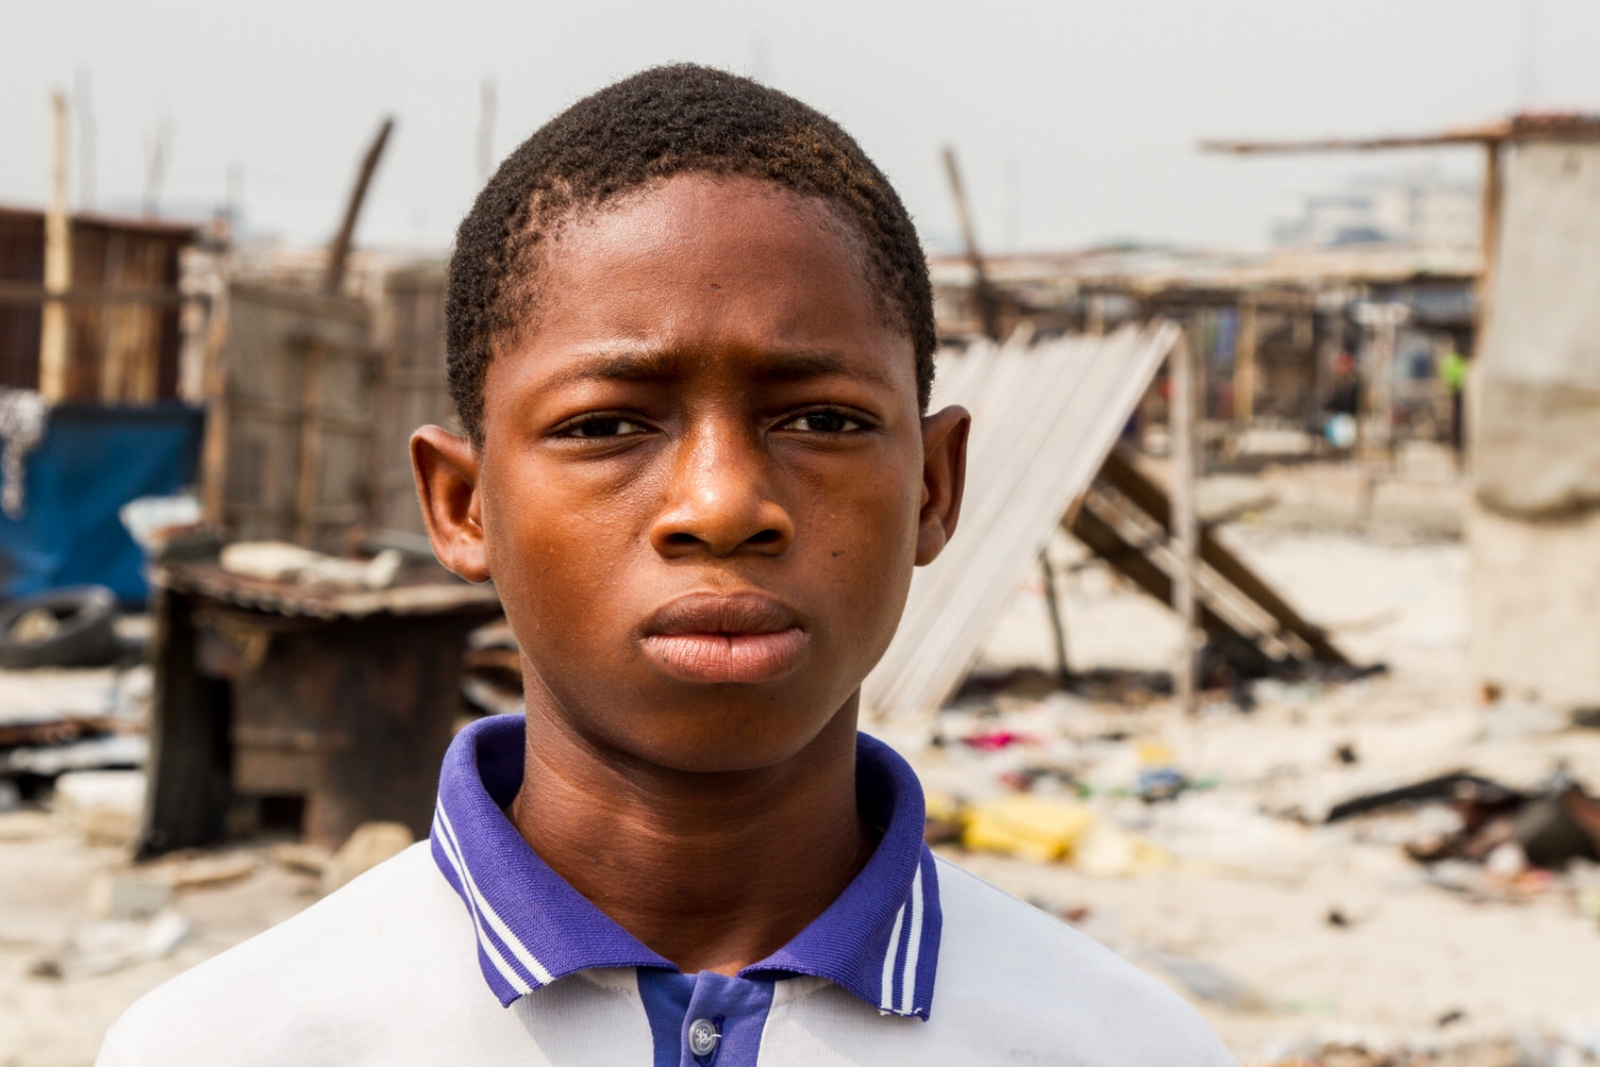  Nasu Ahmed recalls how his home and possessions were set on fire, and that he hasn't seen his parents since the evictions. His school books and work were burnt and he no longer has anywhere to study. 